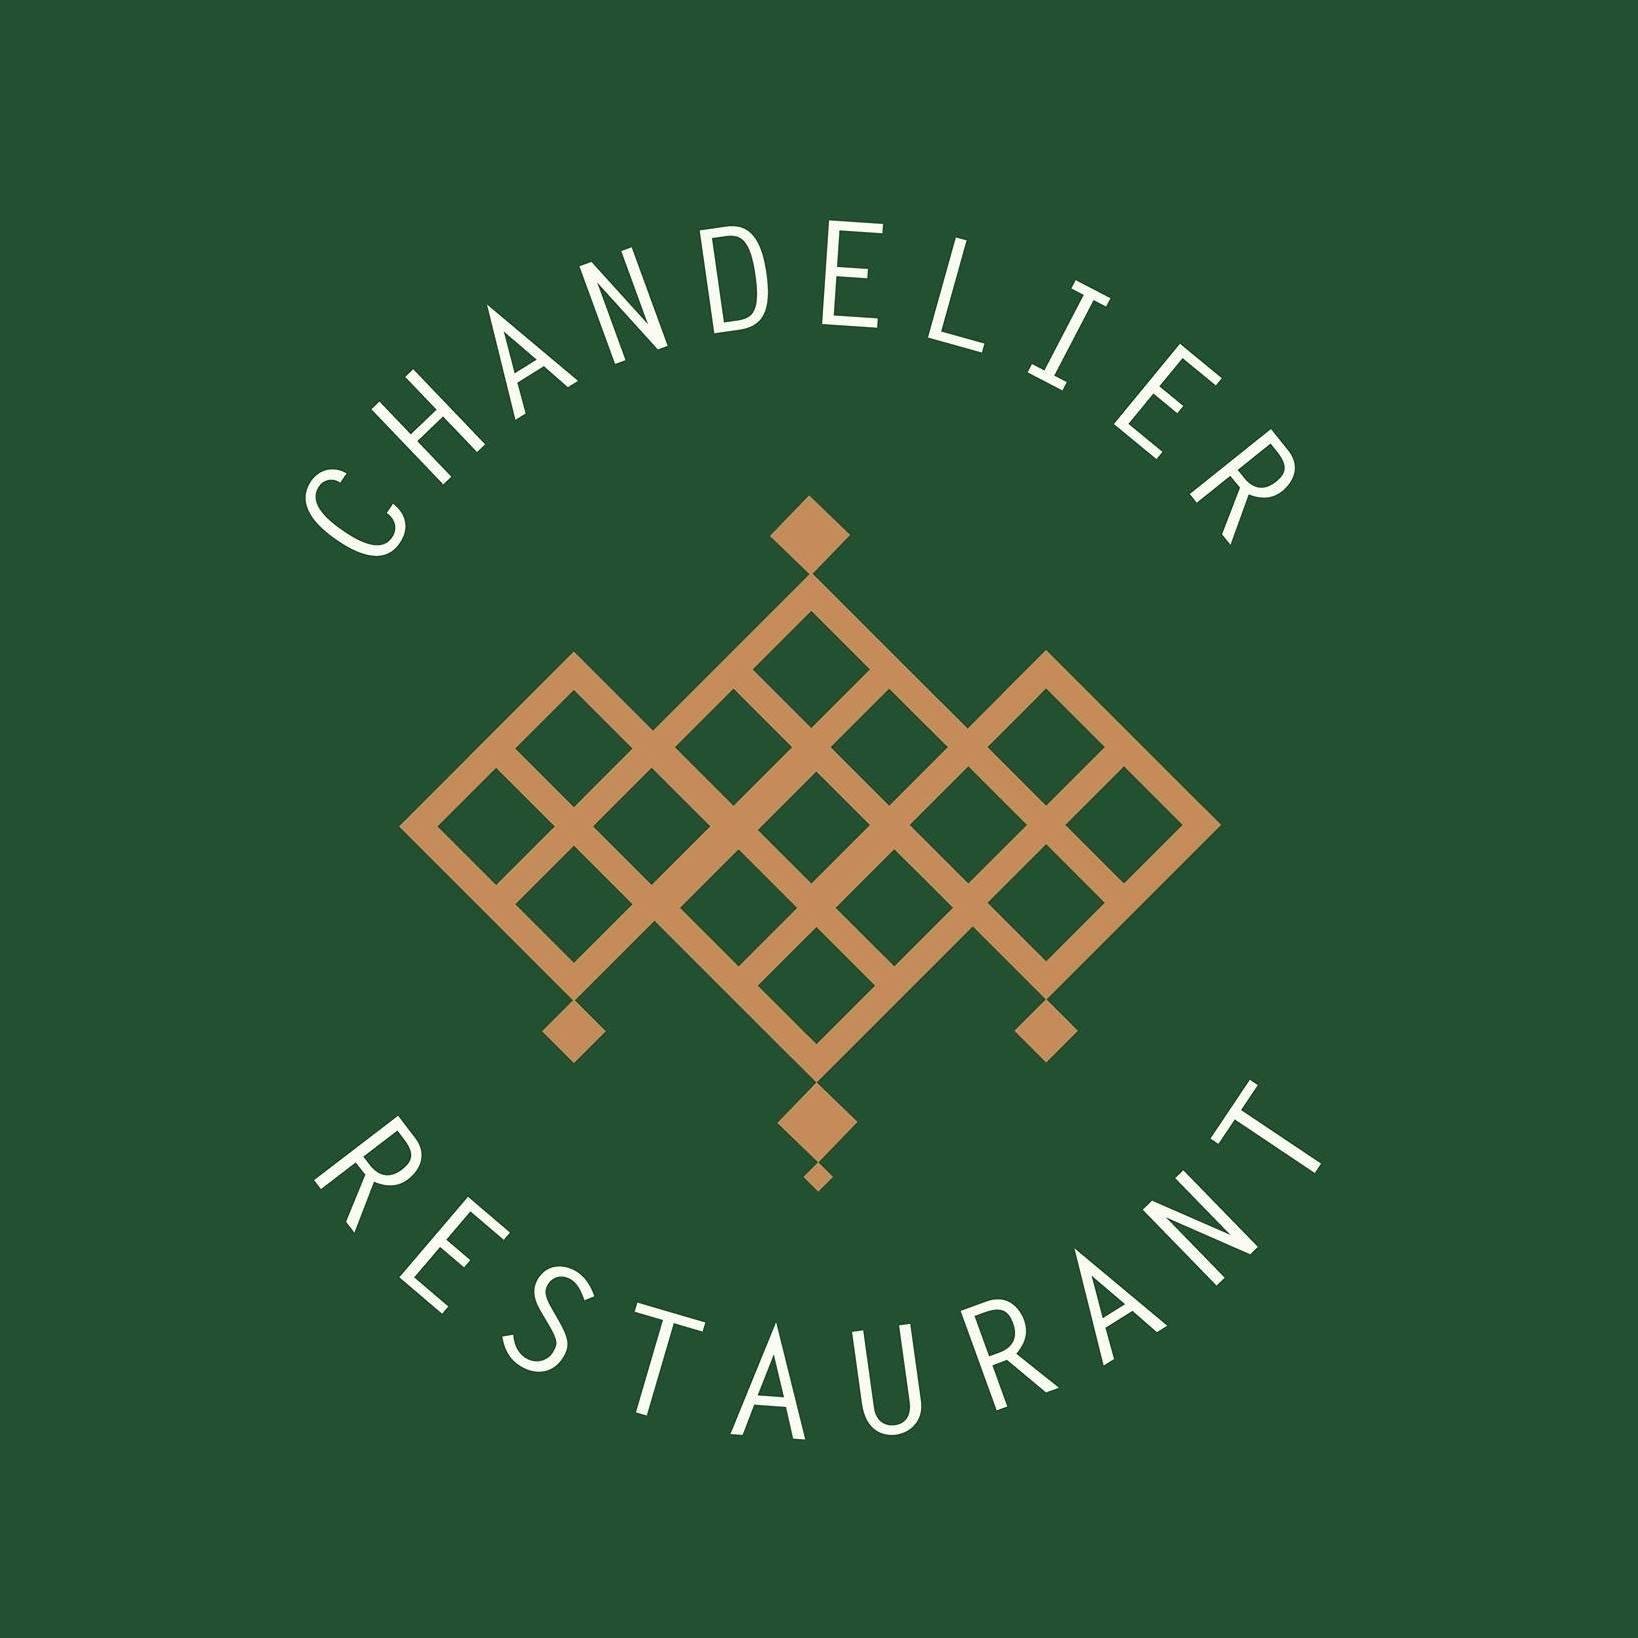 Chandelier Restaurant in the historic Neely House in Downtown Jackson, TN. Located at 575 S Royal St.